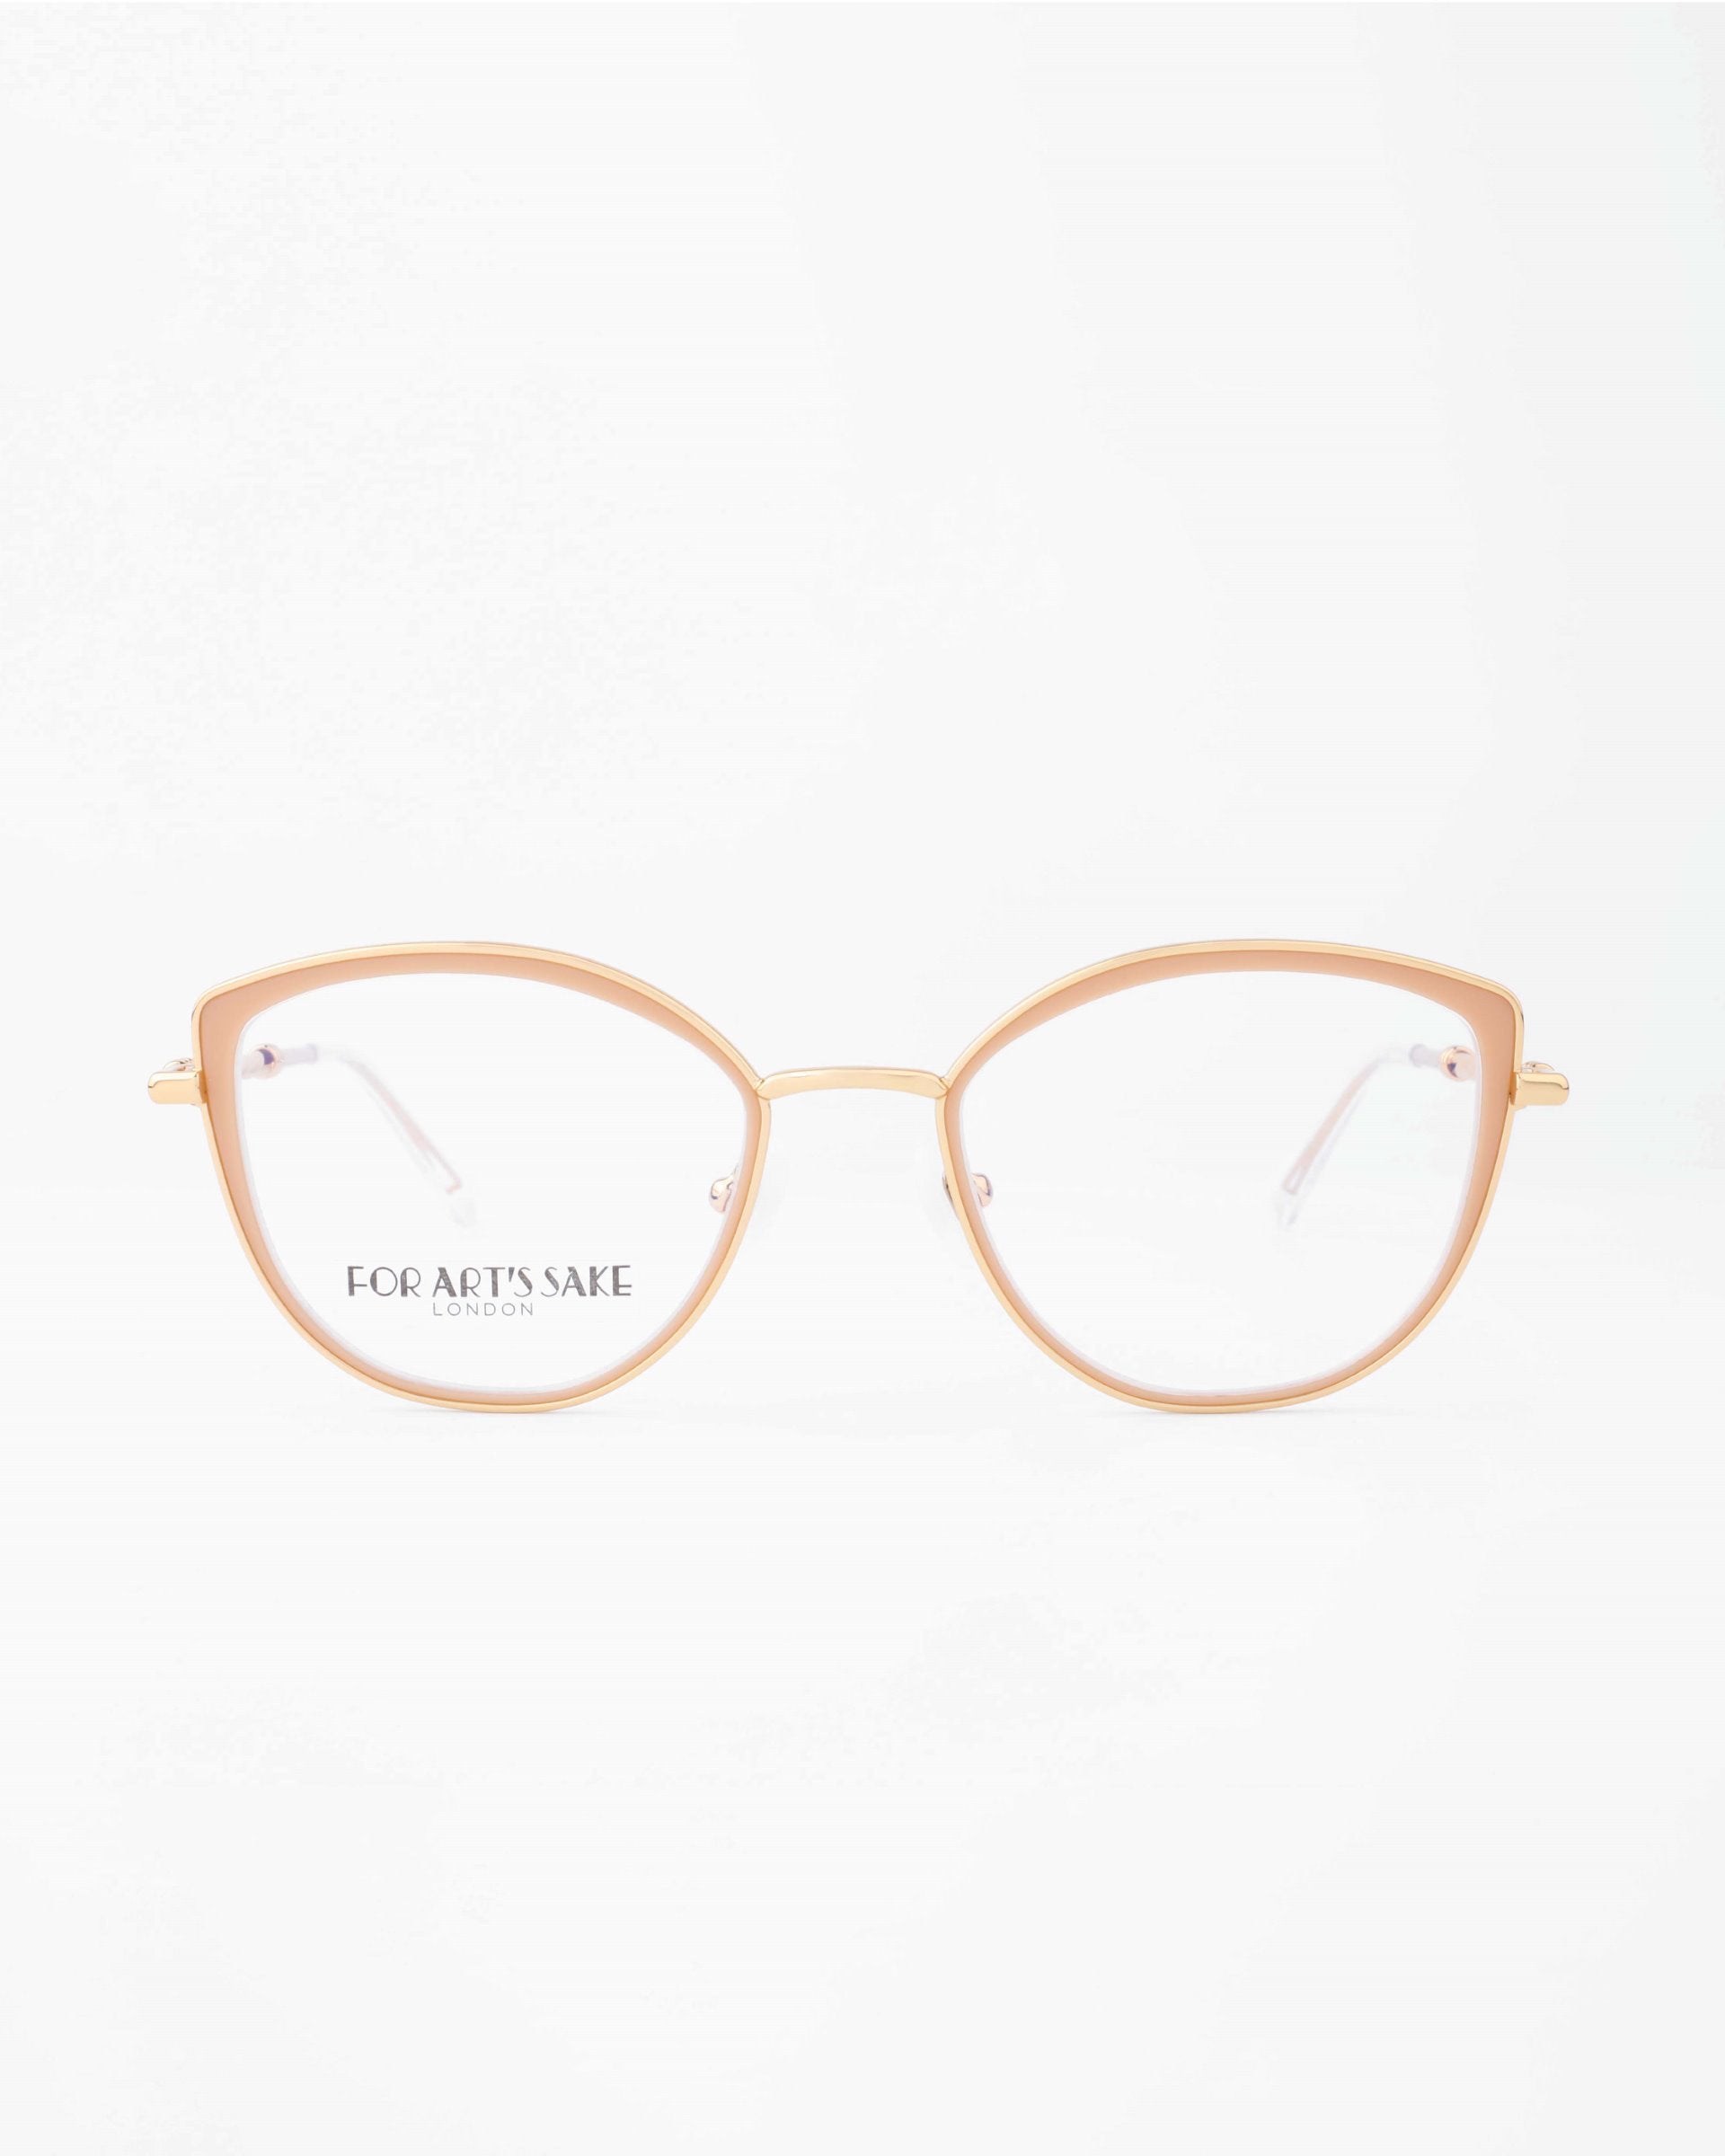 A pair of stylish For Art's Sake® Julie eyeglasses with light pink, thin frames. The lenses are large and round, featuring a subtle blue light filter and an inscription on the left lens that reads "FOR ART'S SAKE LONDON." The background is a plain, white surface.